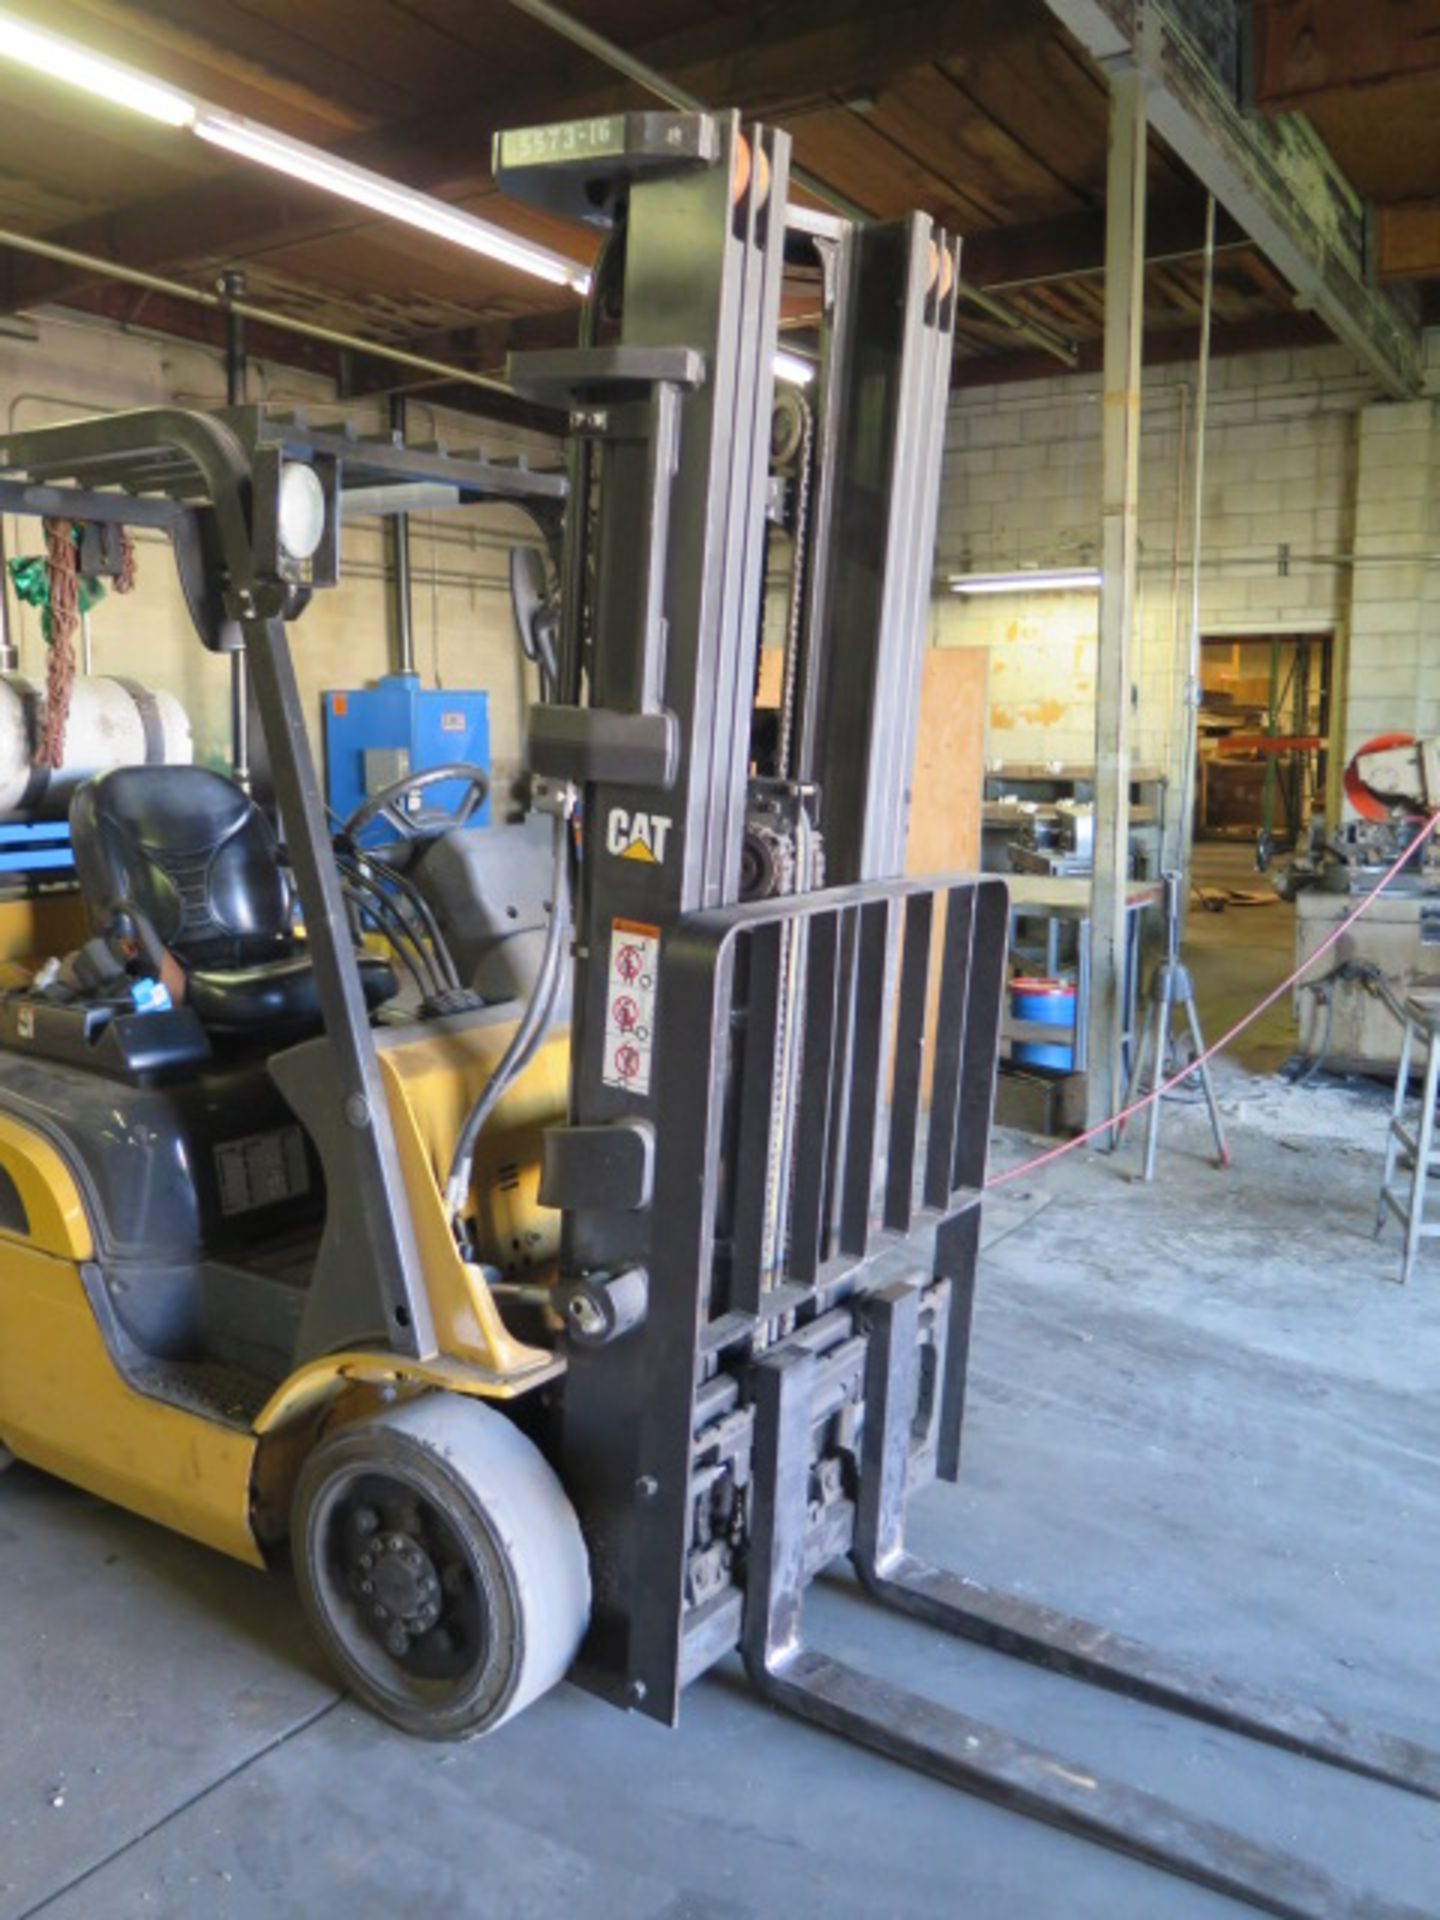 Caterpillar 2C5000 3150 Lb Cap LPG Forklift s/n AT9034227 w/ 3-Stage Mast, 217” Lift Height, Side - Image 4 of 13